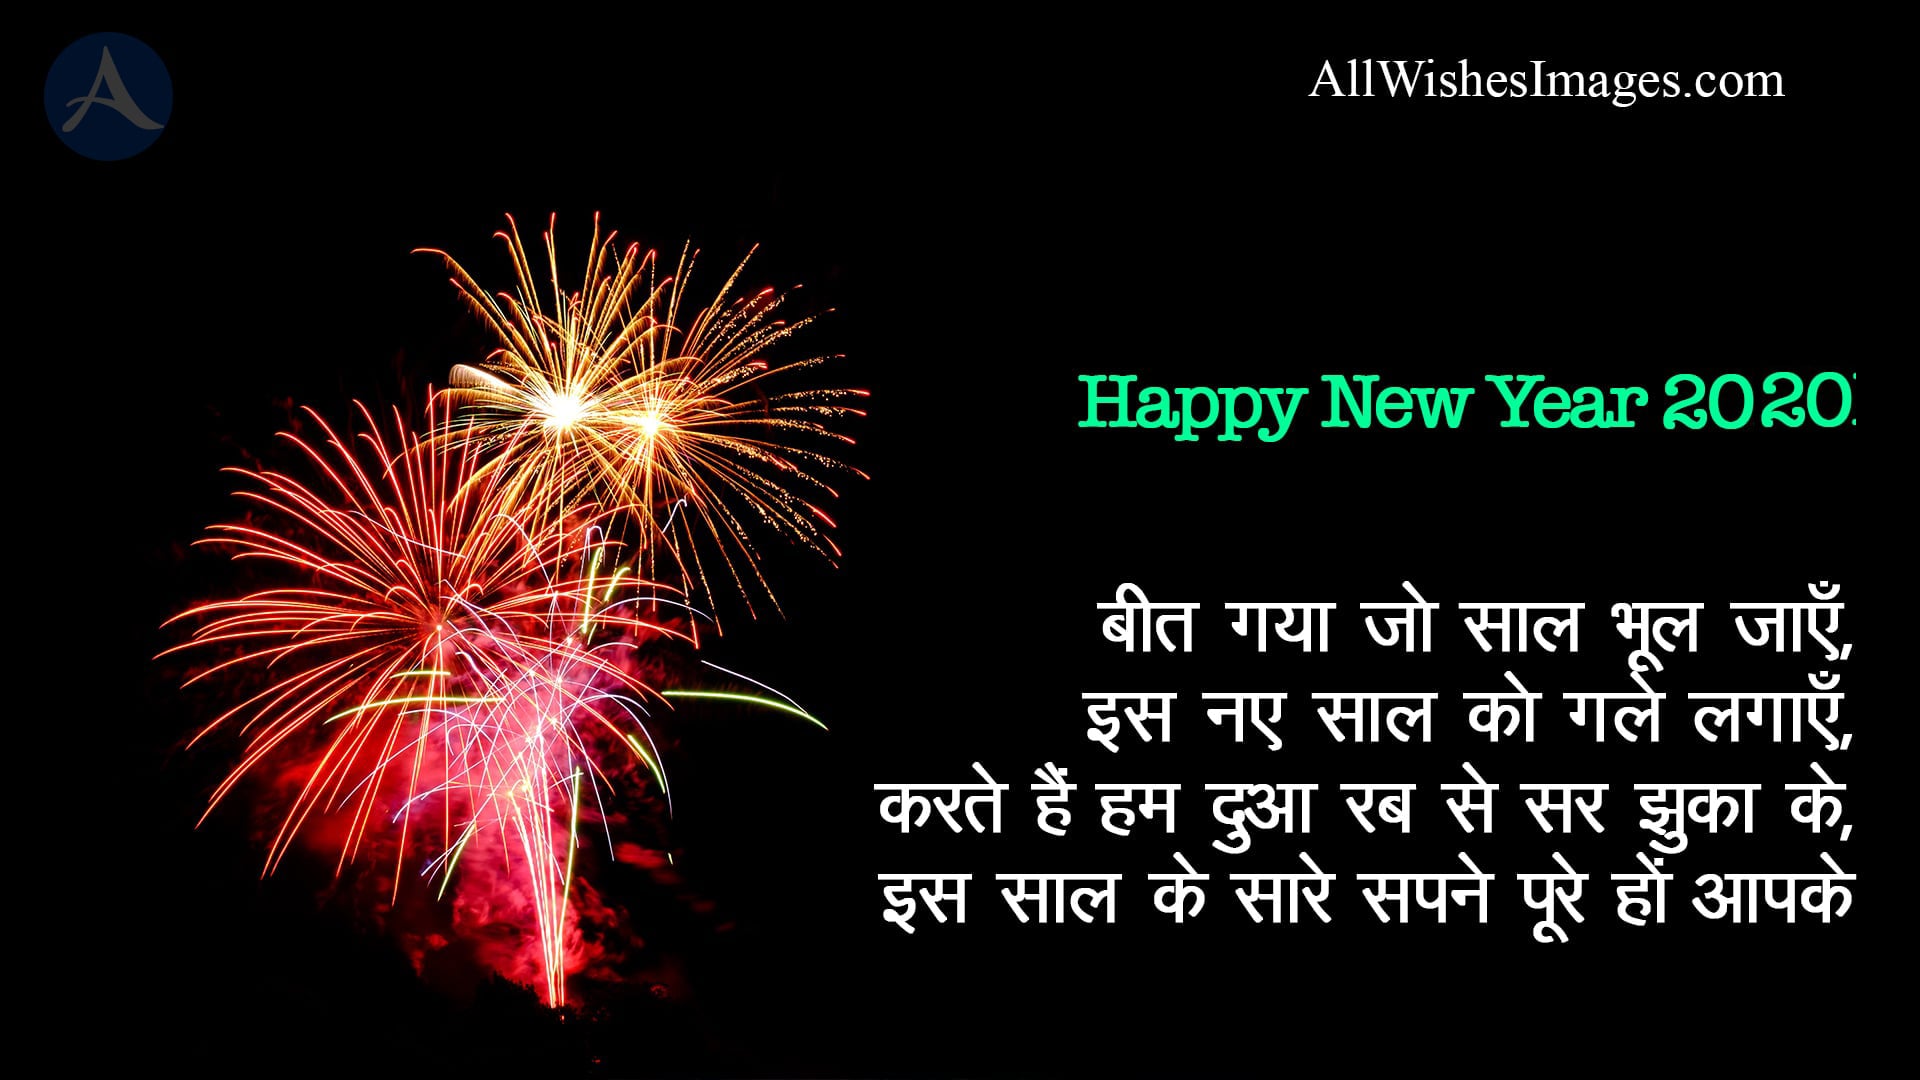 Happy New Year Shayari 2020 With Image - All Wishes Images - Images for  WhatsApp